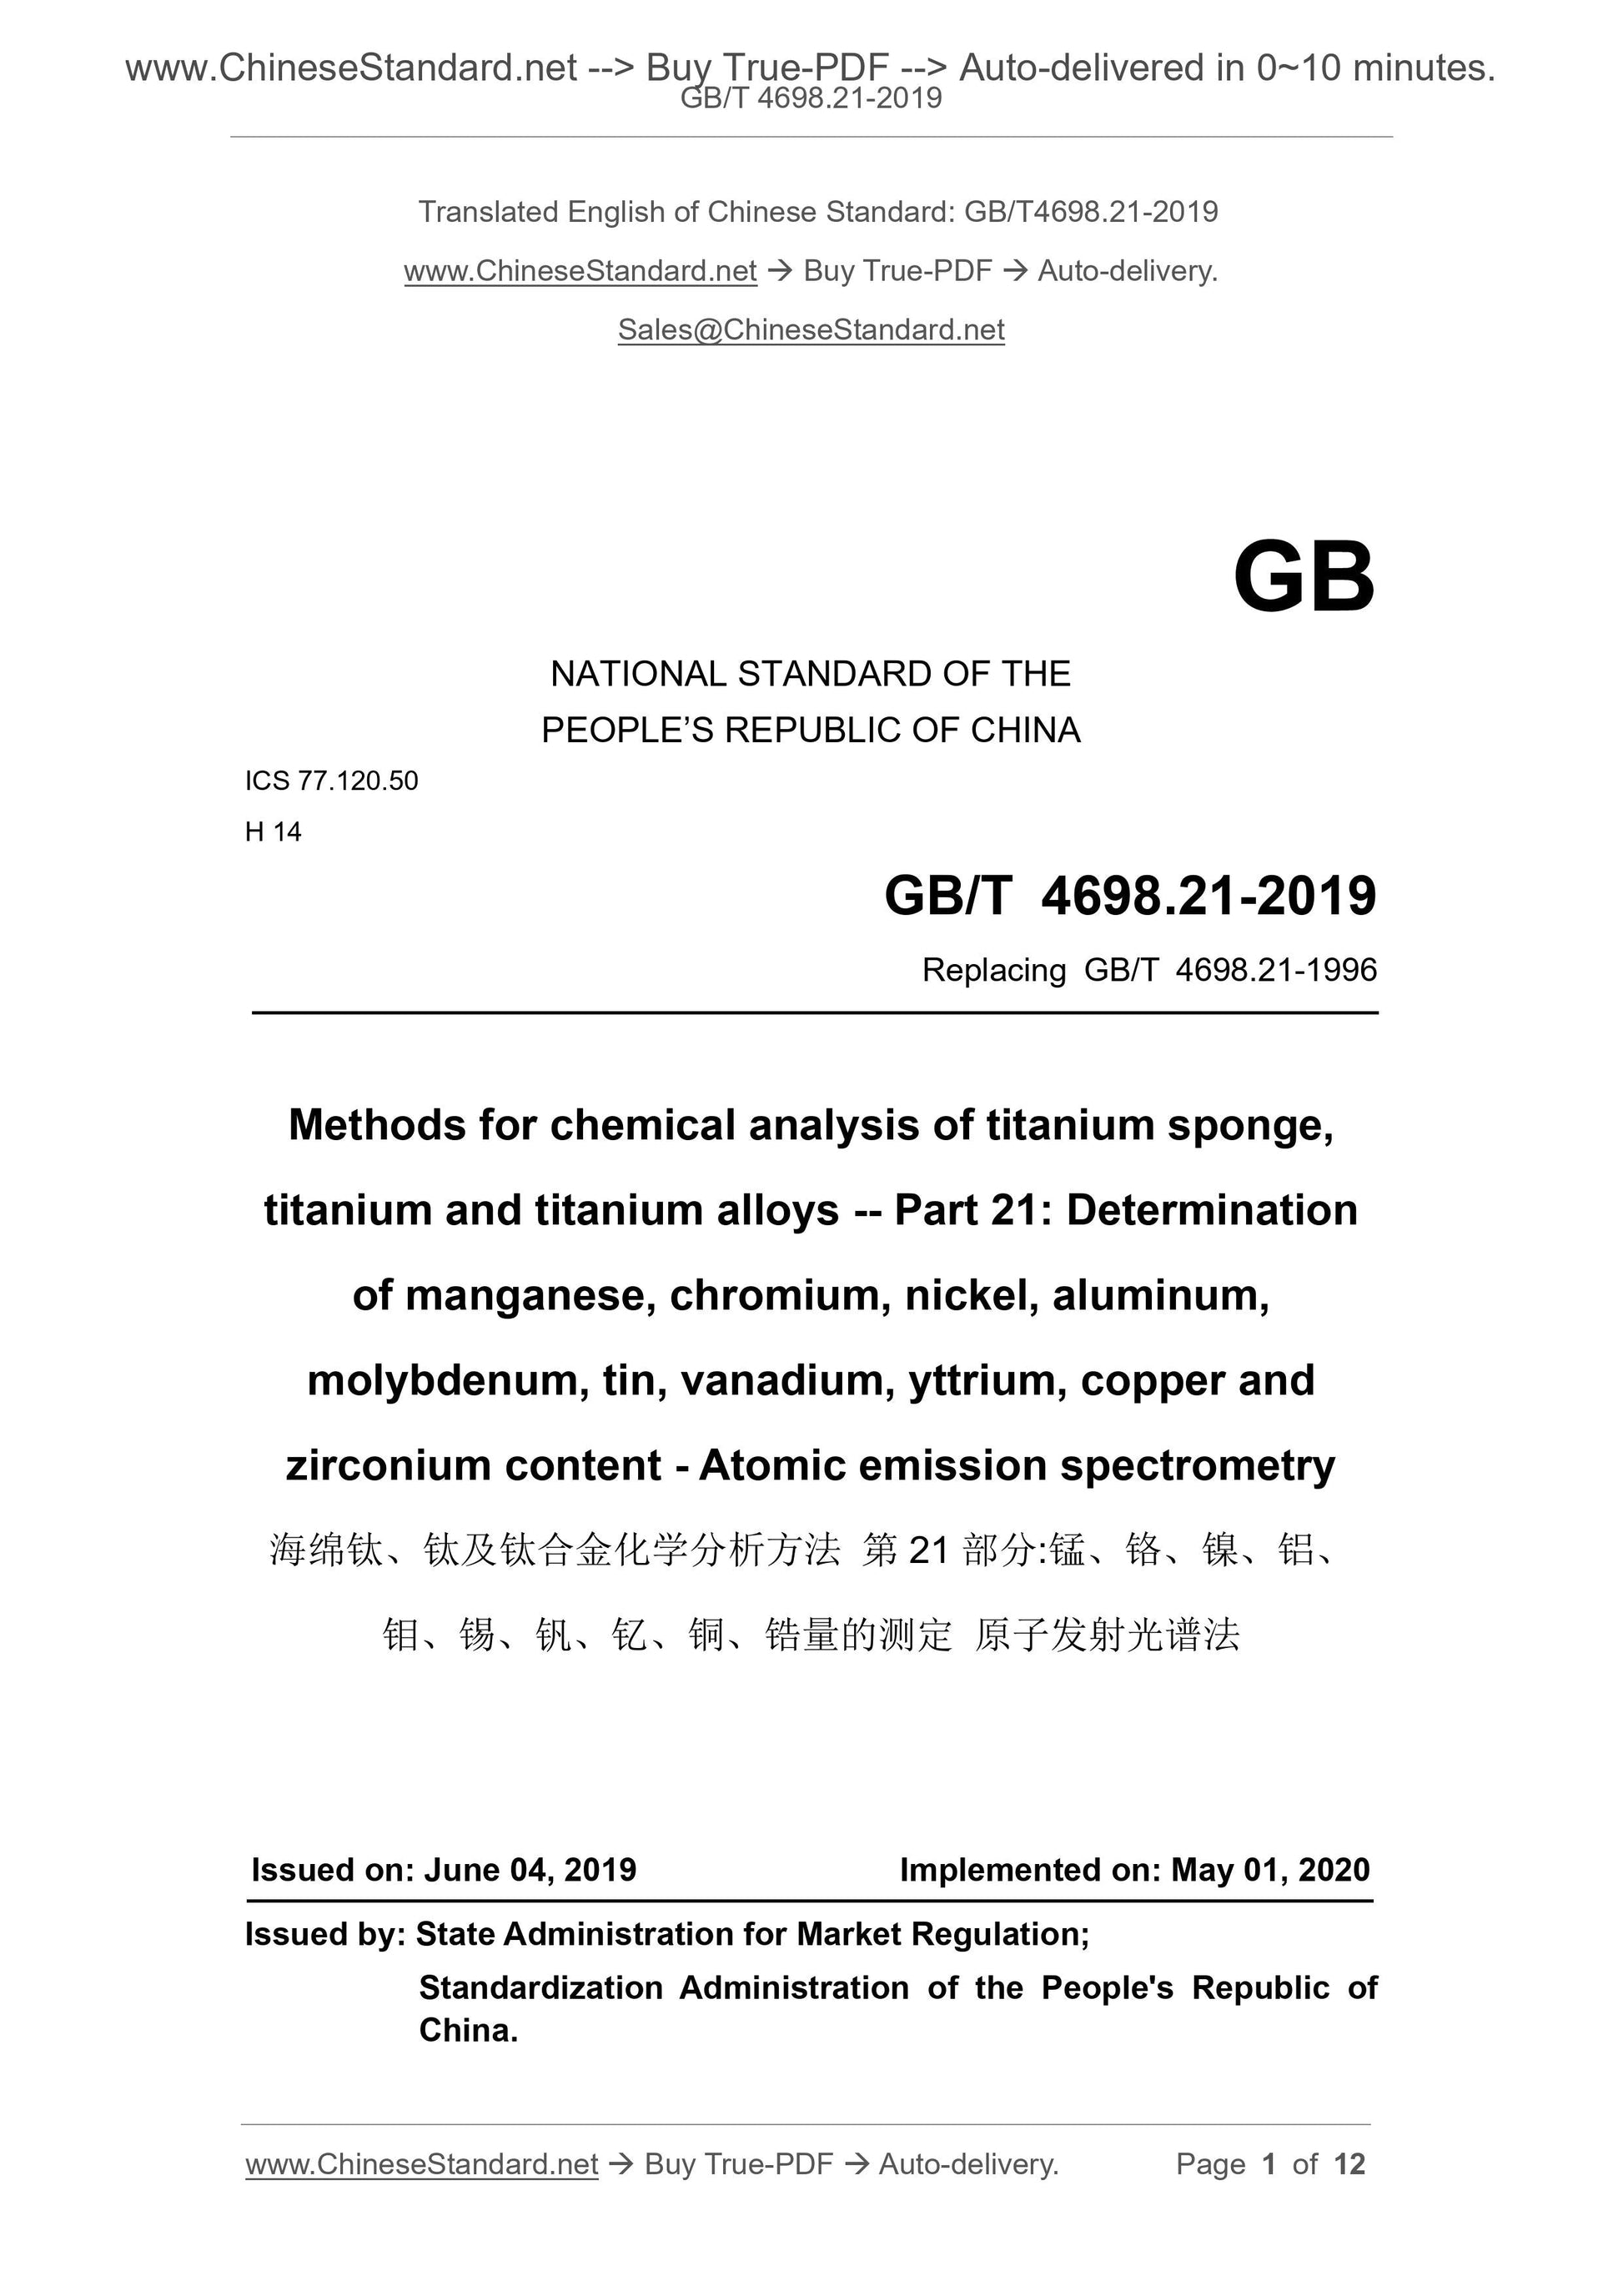 GB/T 4698.21-2019 Page 1